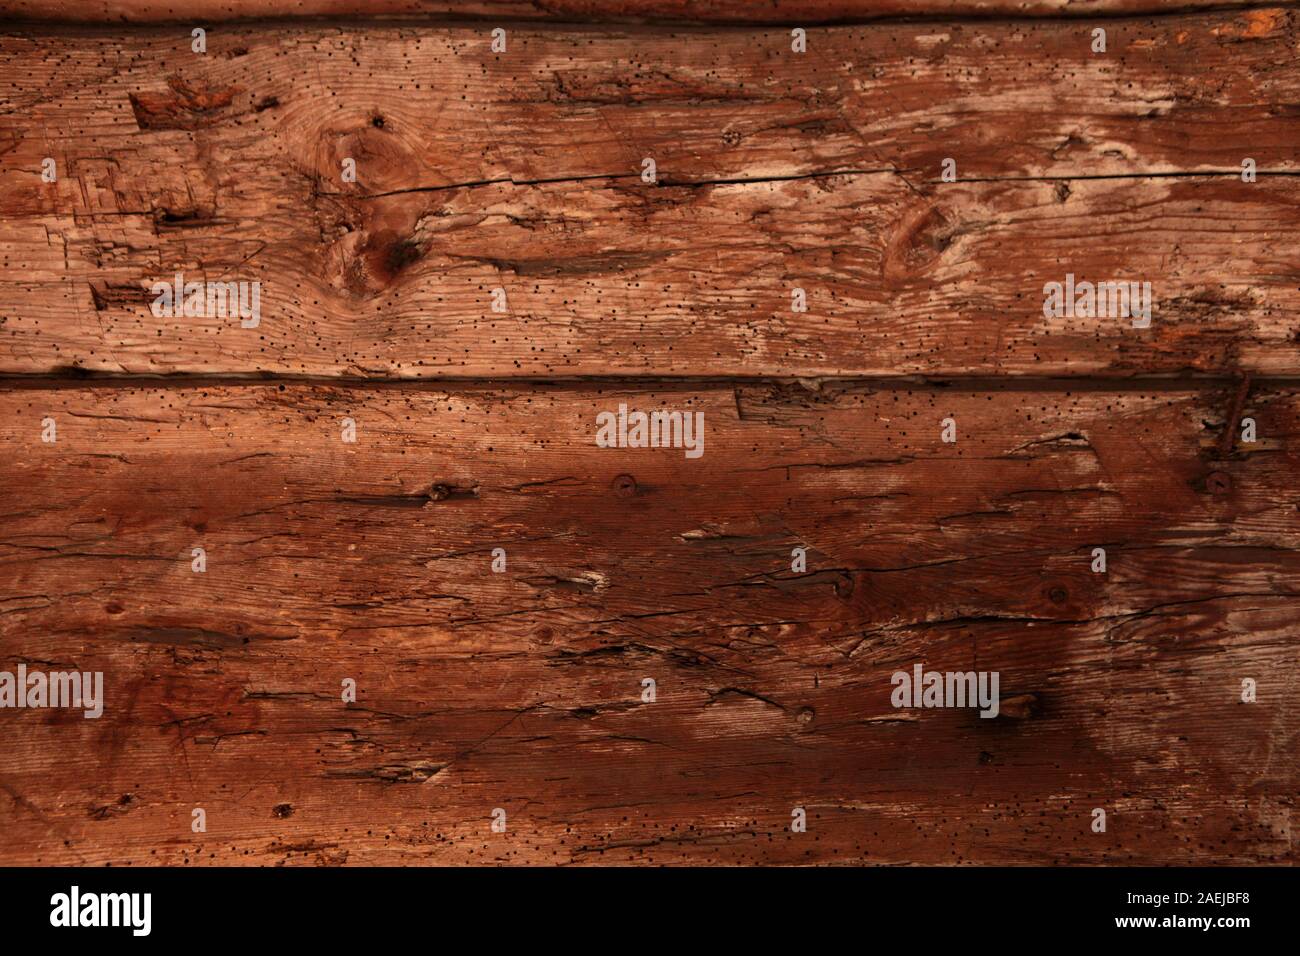 Brown Old Texture Of Wood Used As Natural Background Wooden House